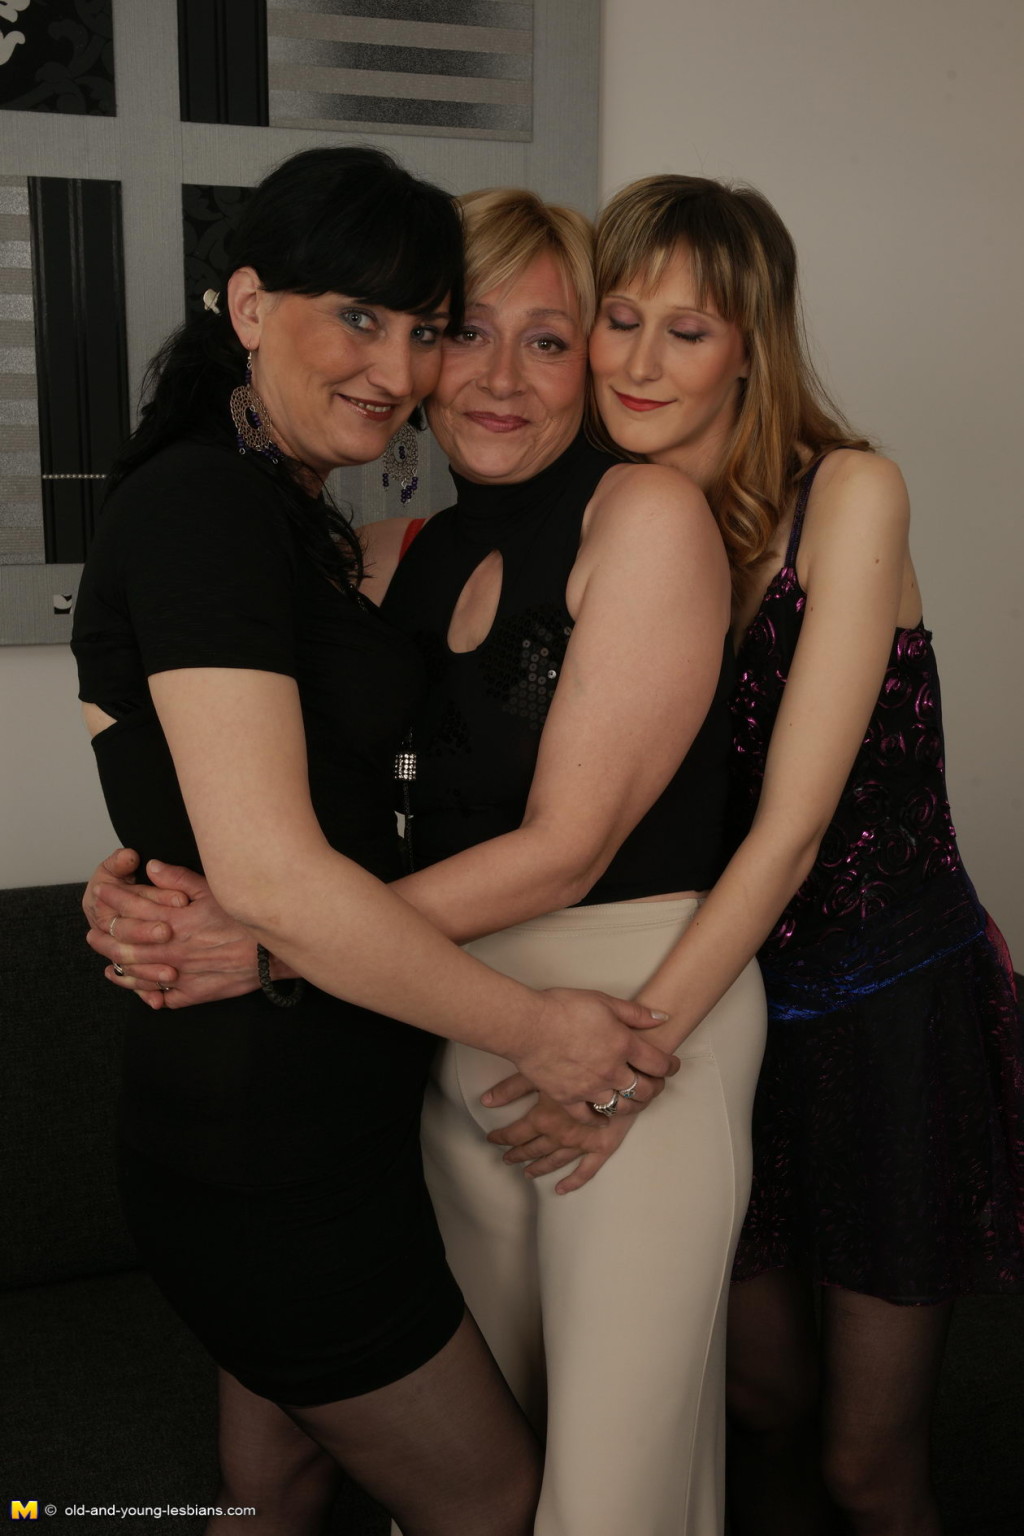 Three old and young lesbians get ready to party #68641771